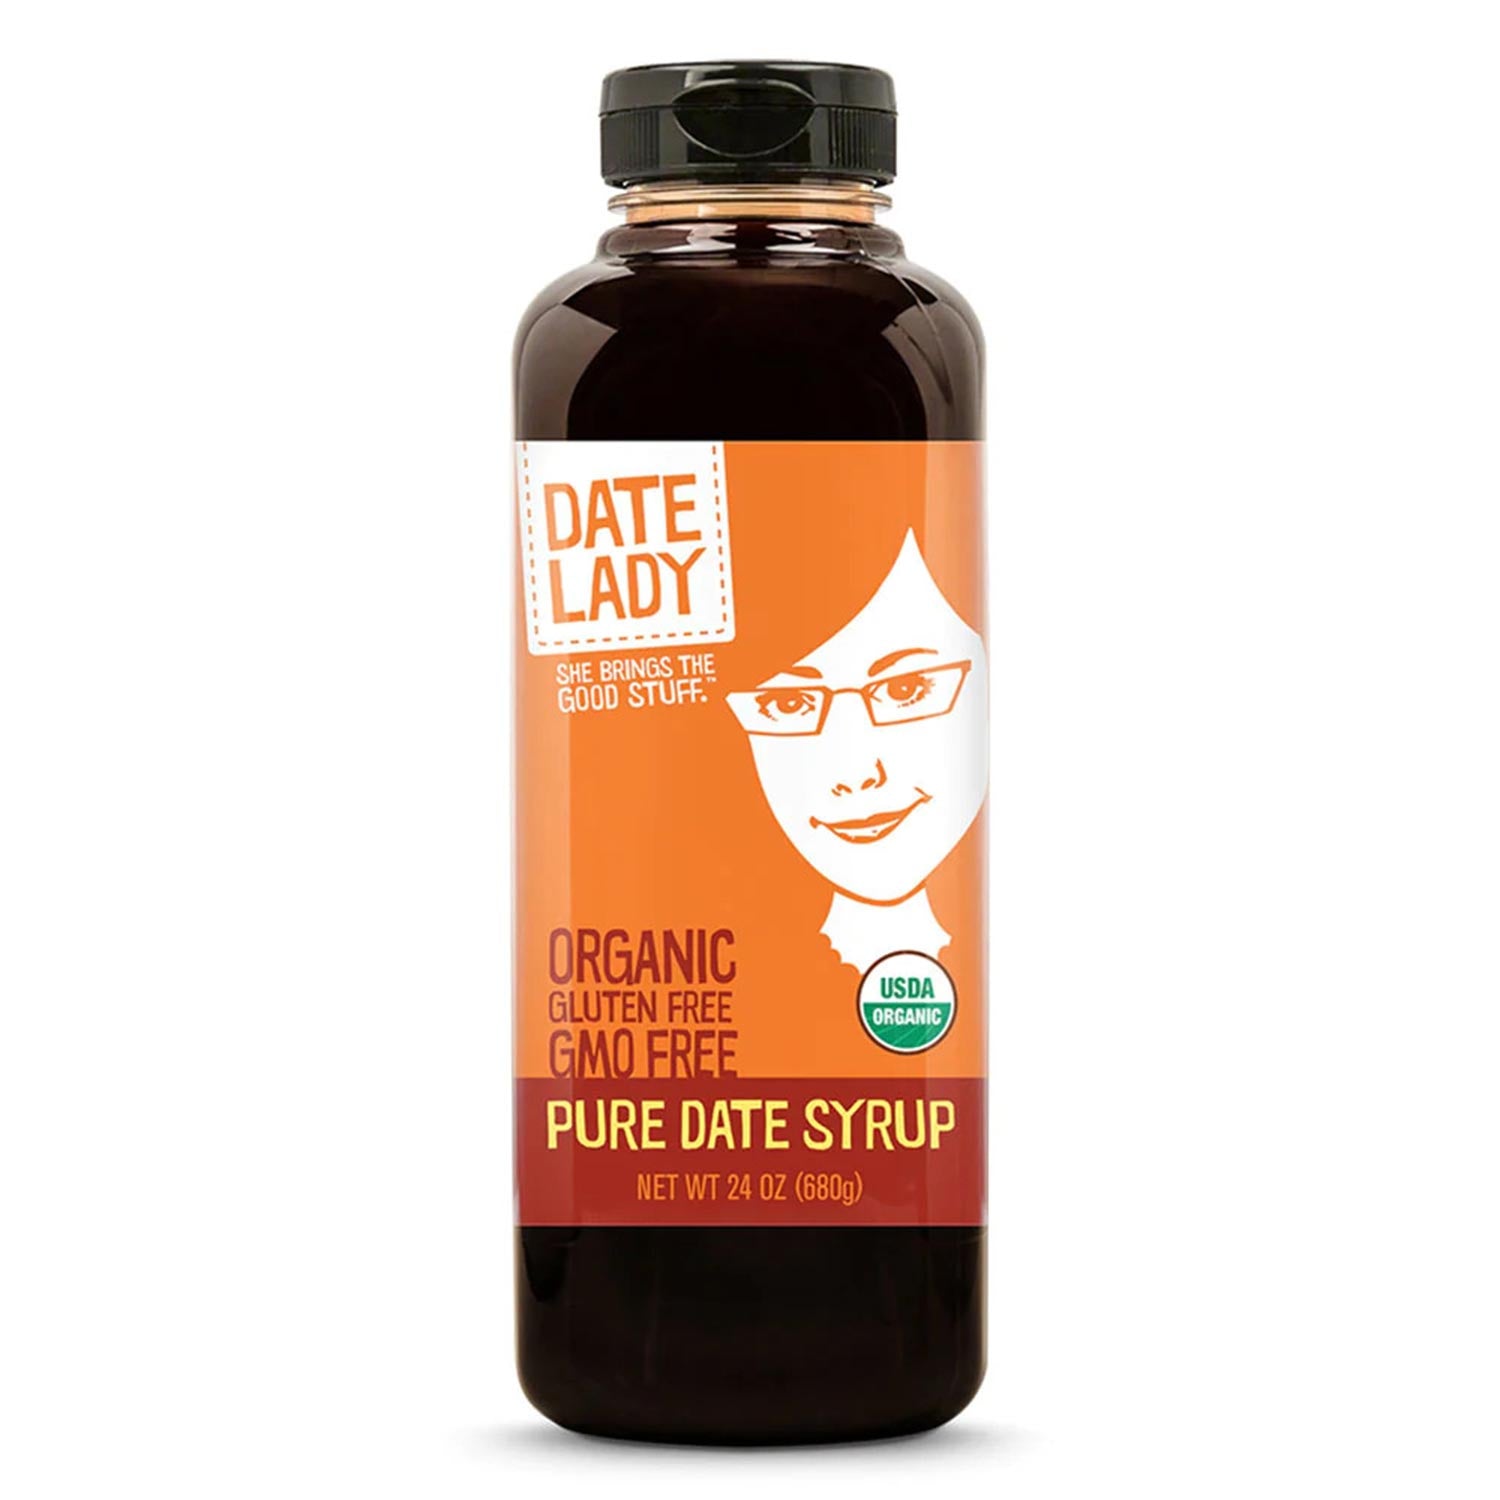 Date Lady Organic Date Syrup (24oz)